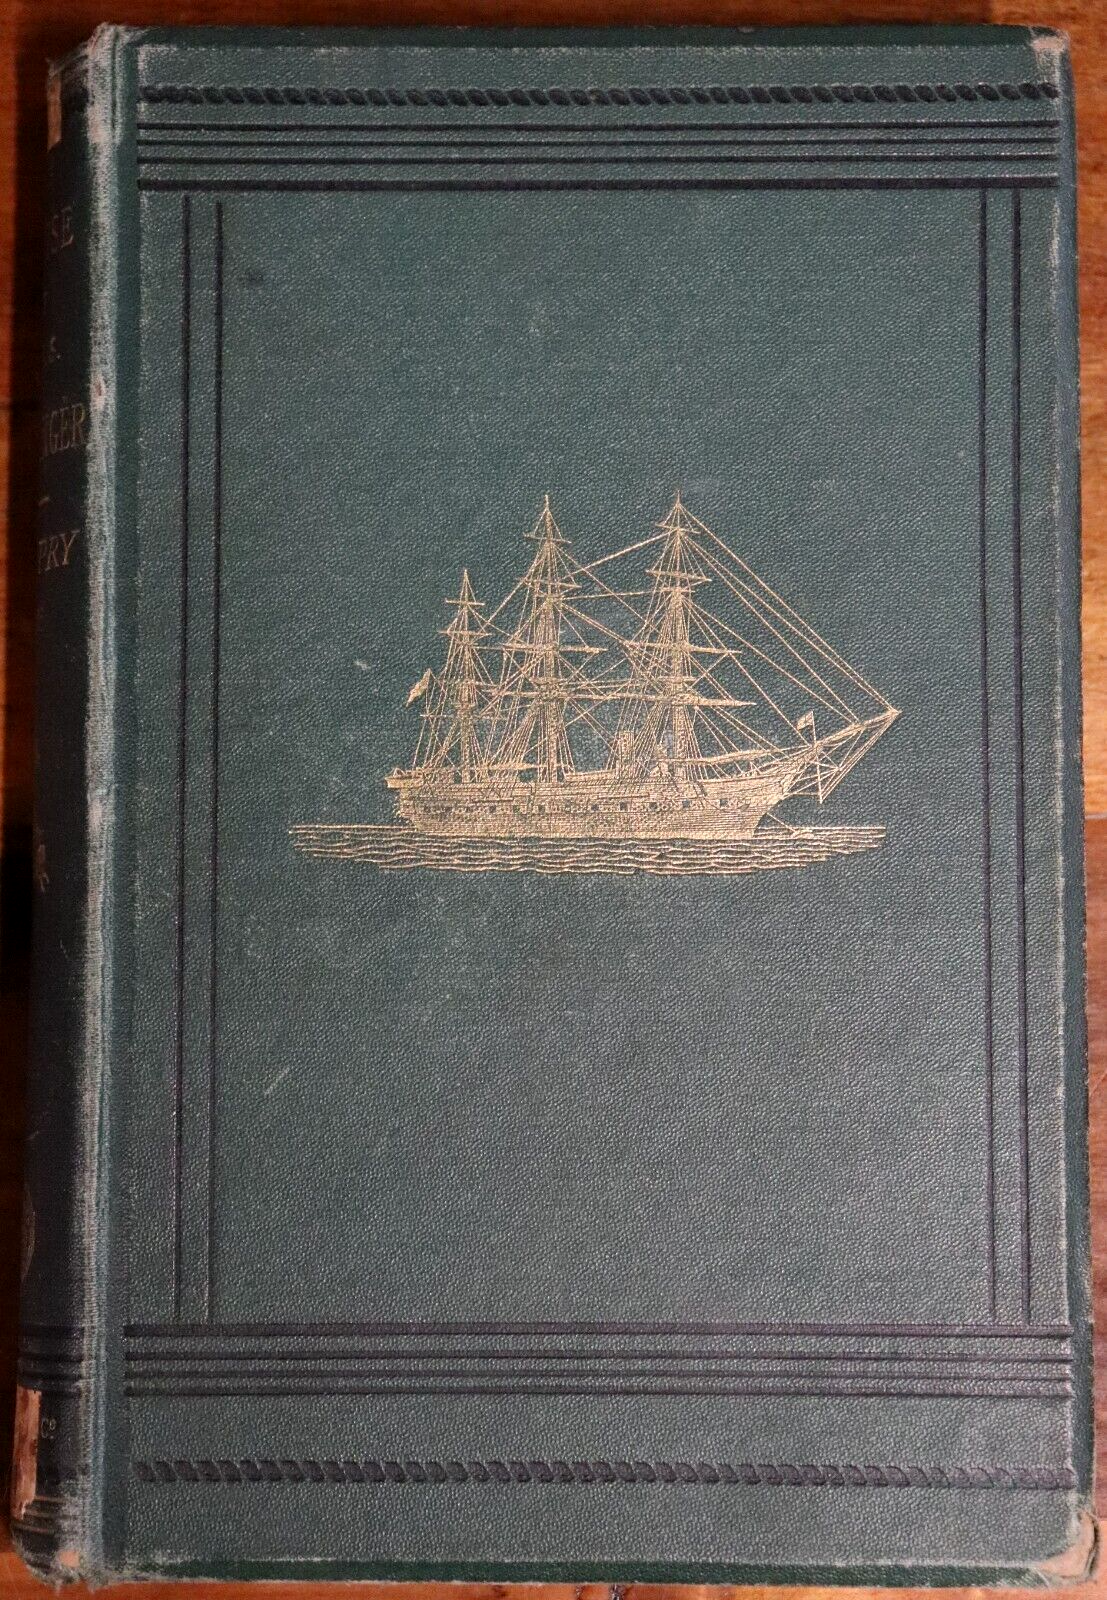 1876 The Cruise of HMS Challenger by WJJ Spry Antiquarian Exploration Book